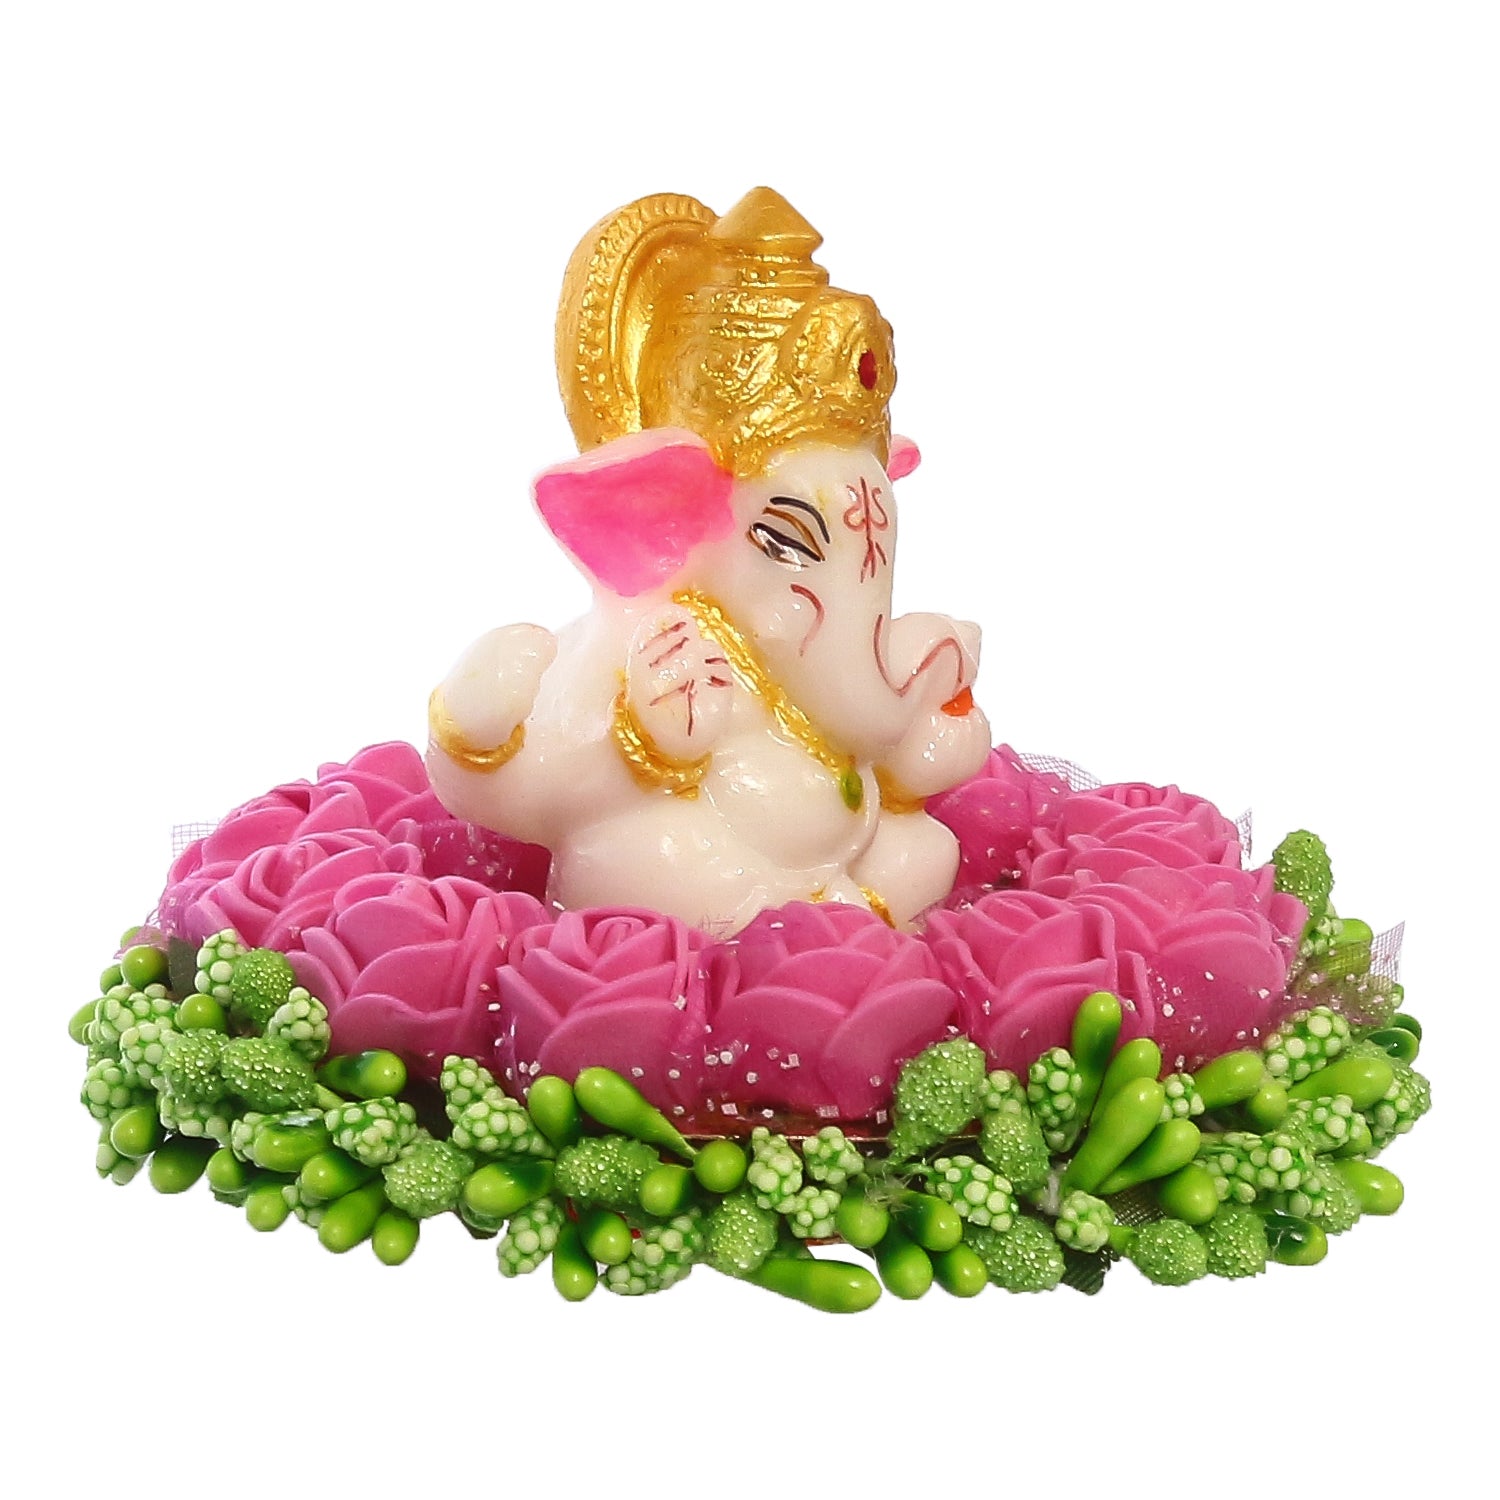 Lord Ganesha Idol On Decorative Handcrafted Pink Flowers Plate 4